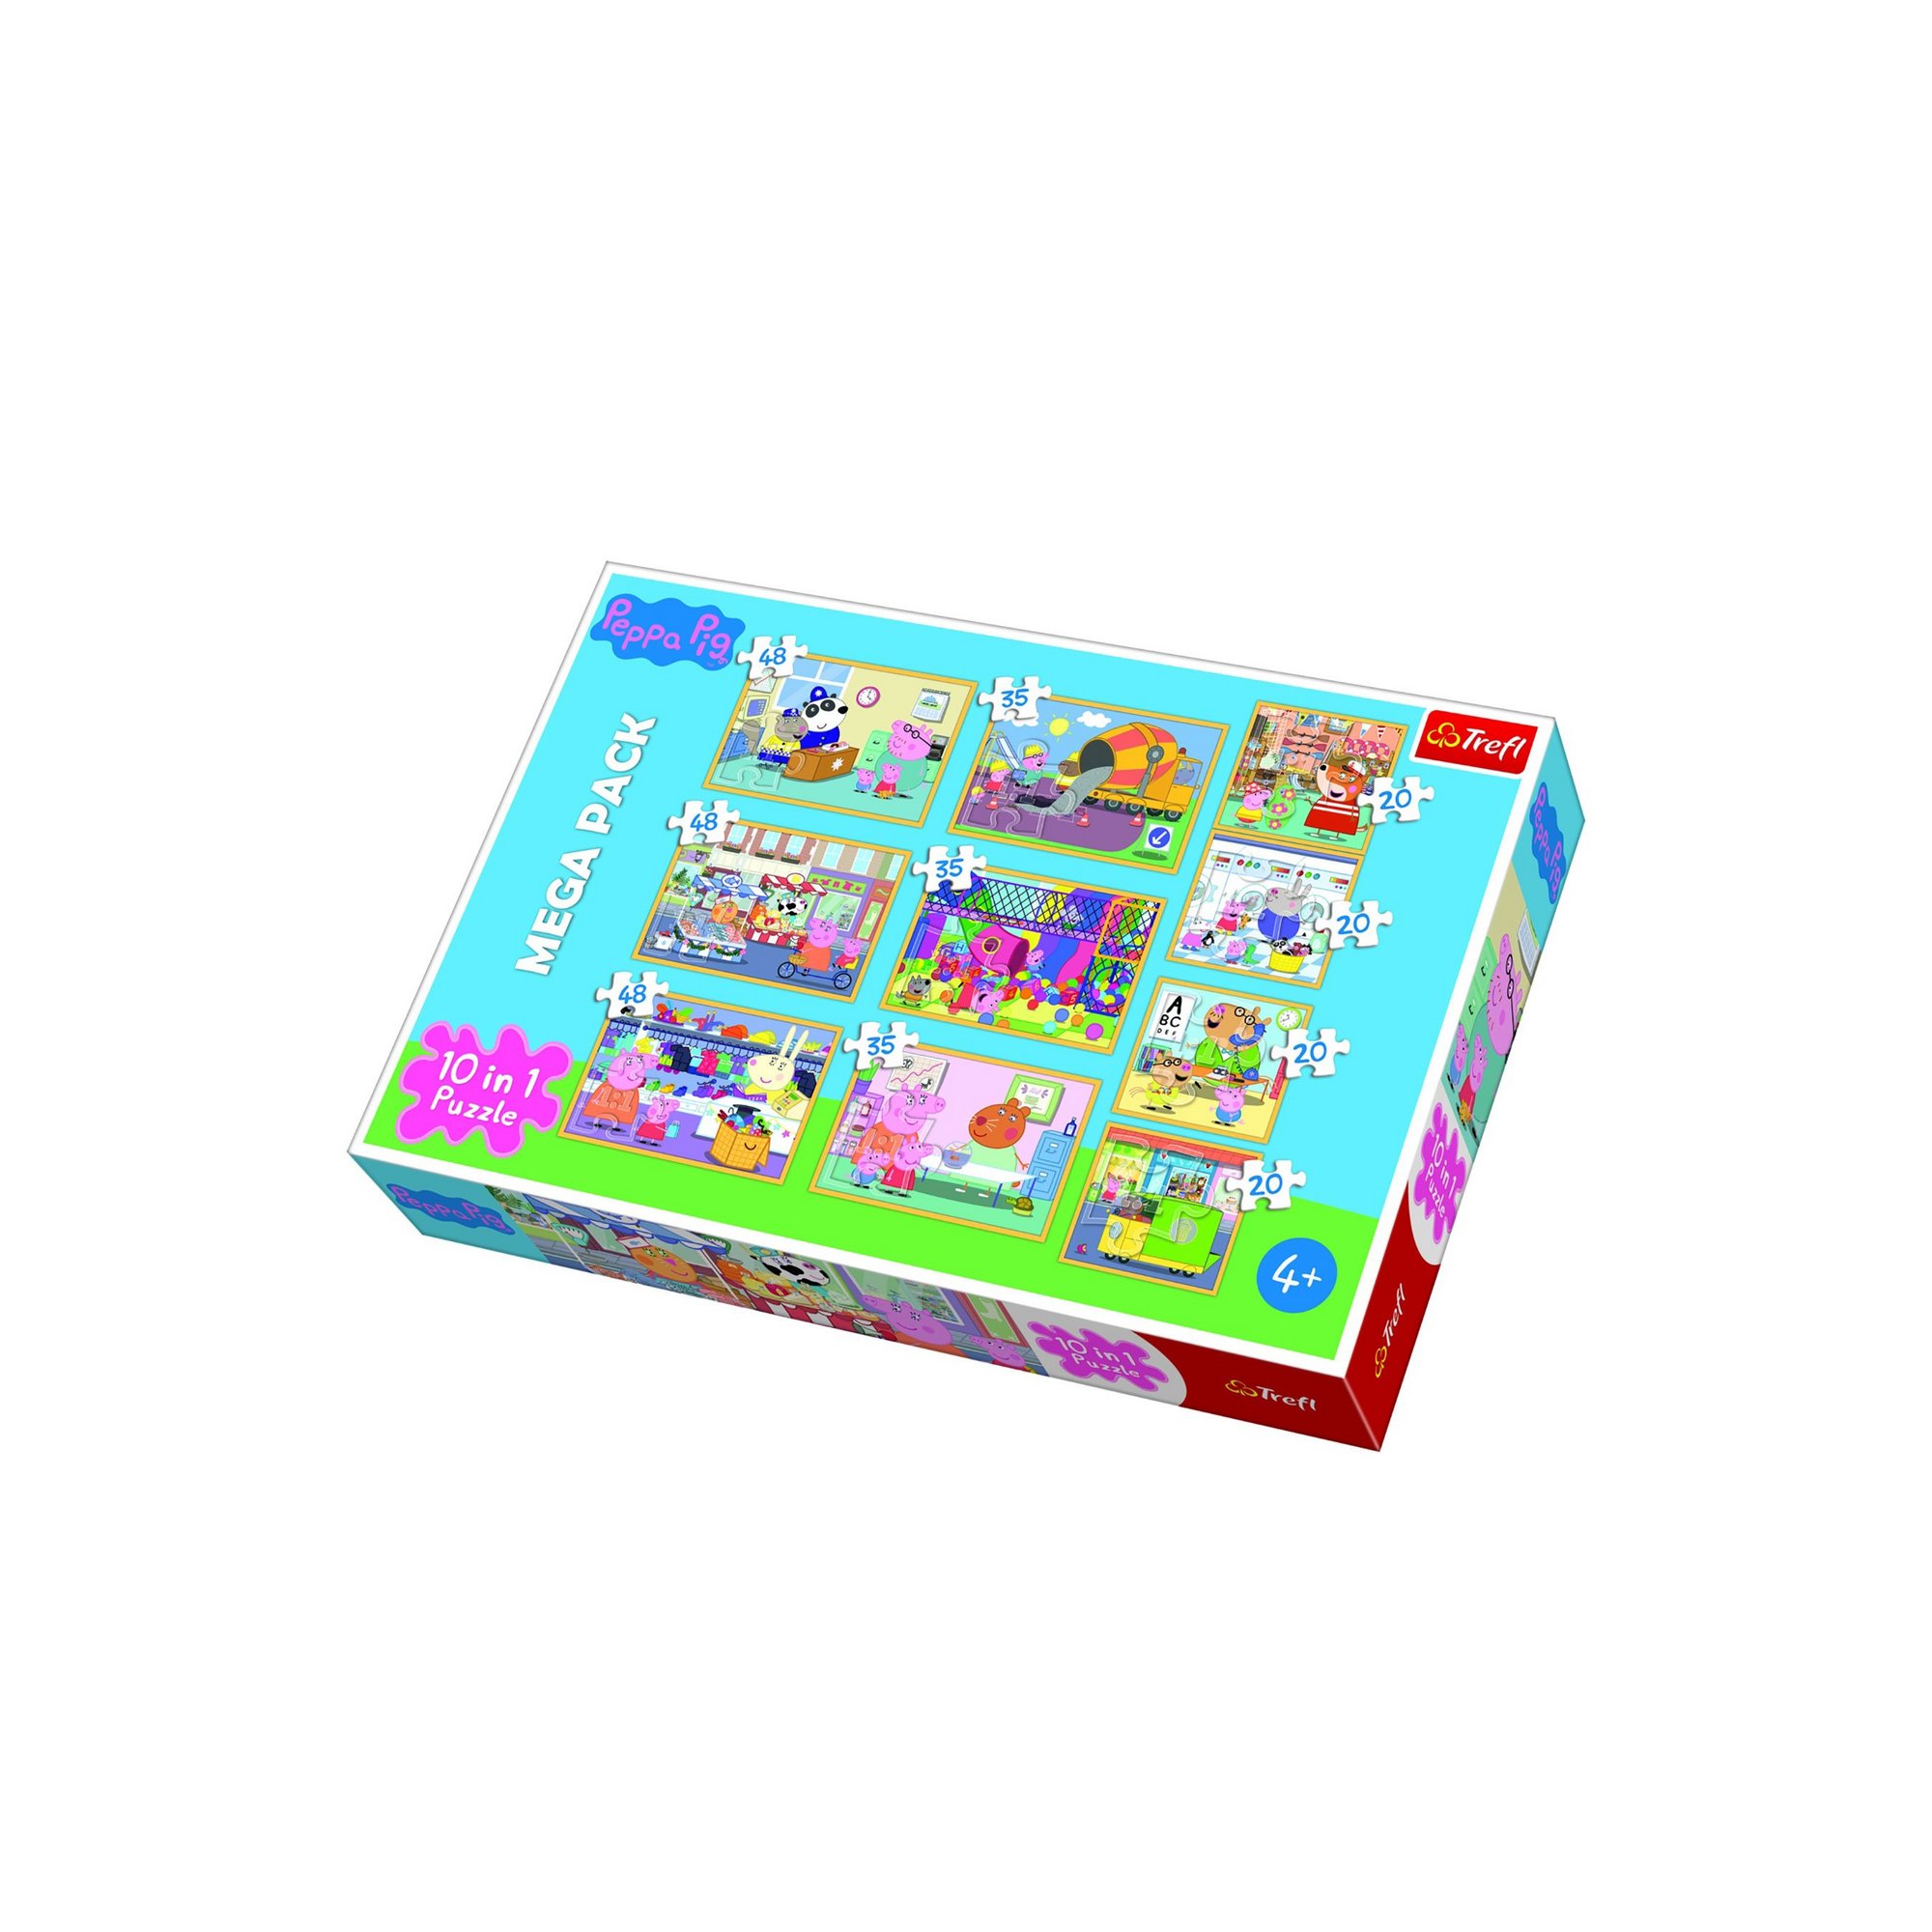 Image of 10-in-1 Peppa Pig Jigsaw Puzzle